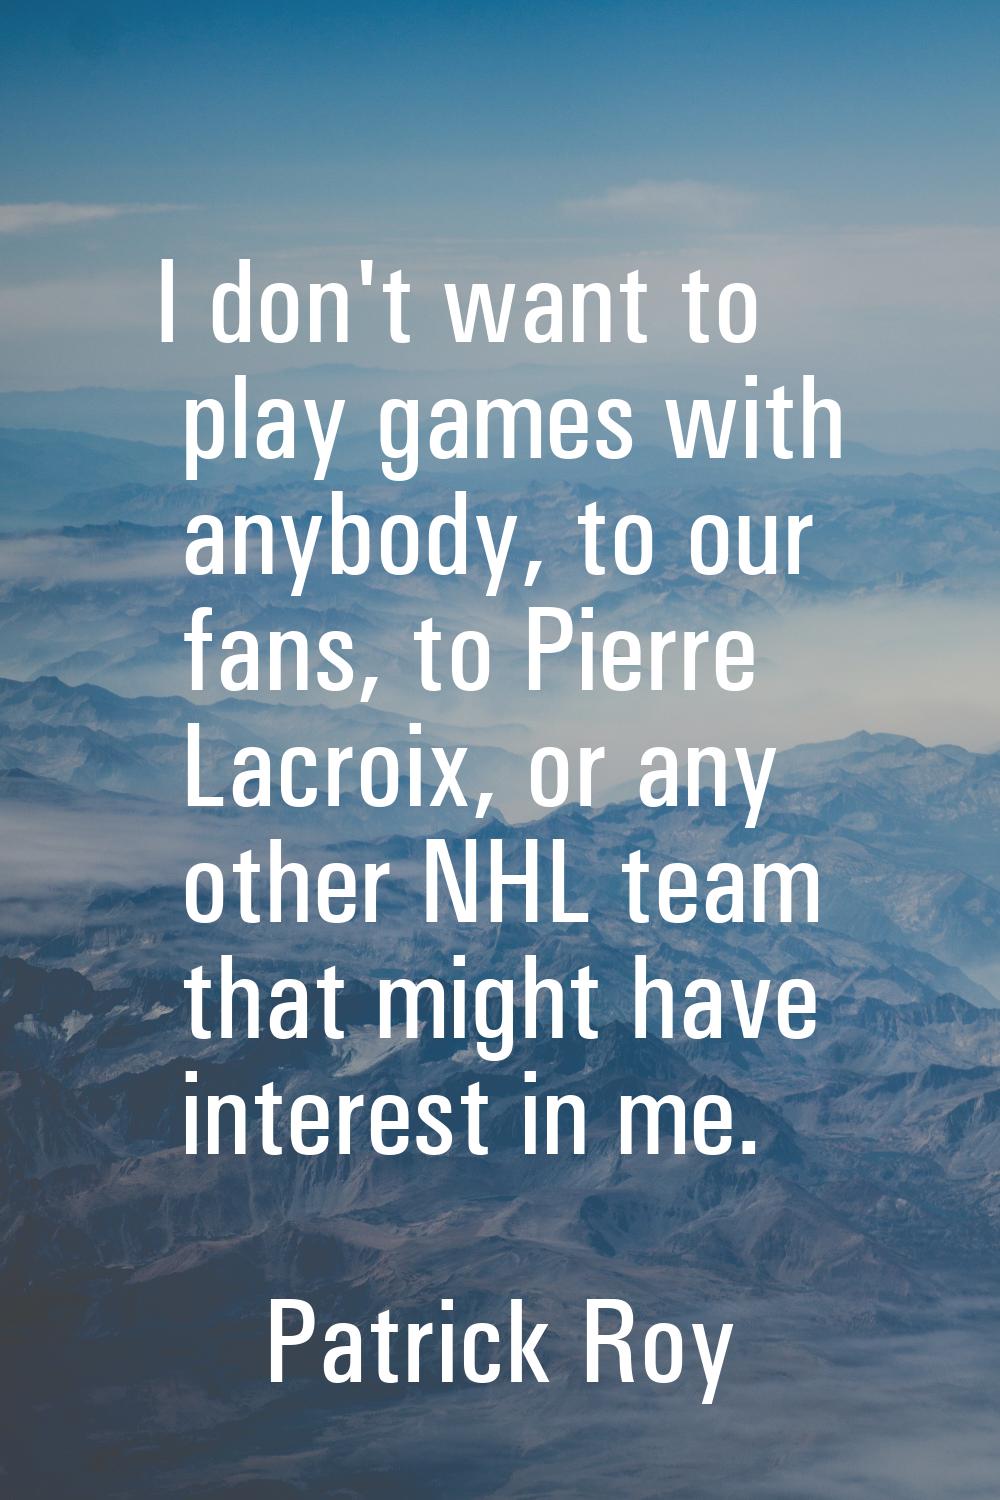 I don't want to play games with anybody, to our fans, to Pierre Lacroix, or any other NHL team that